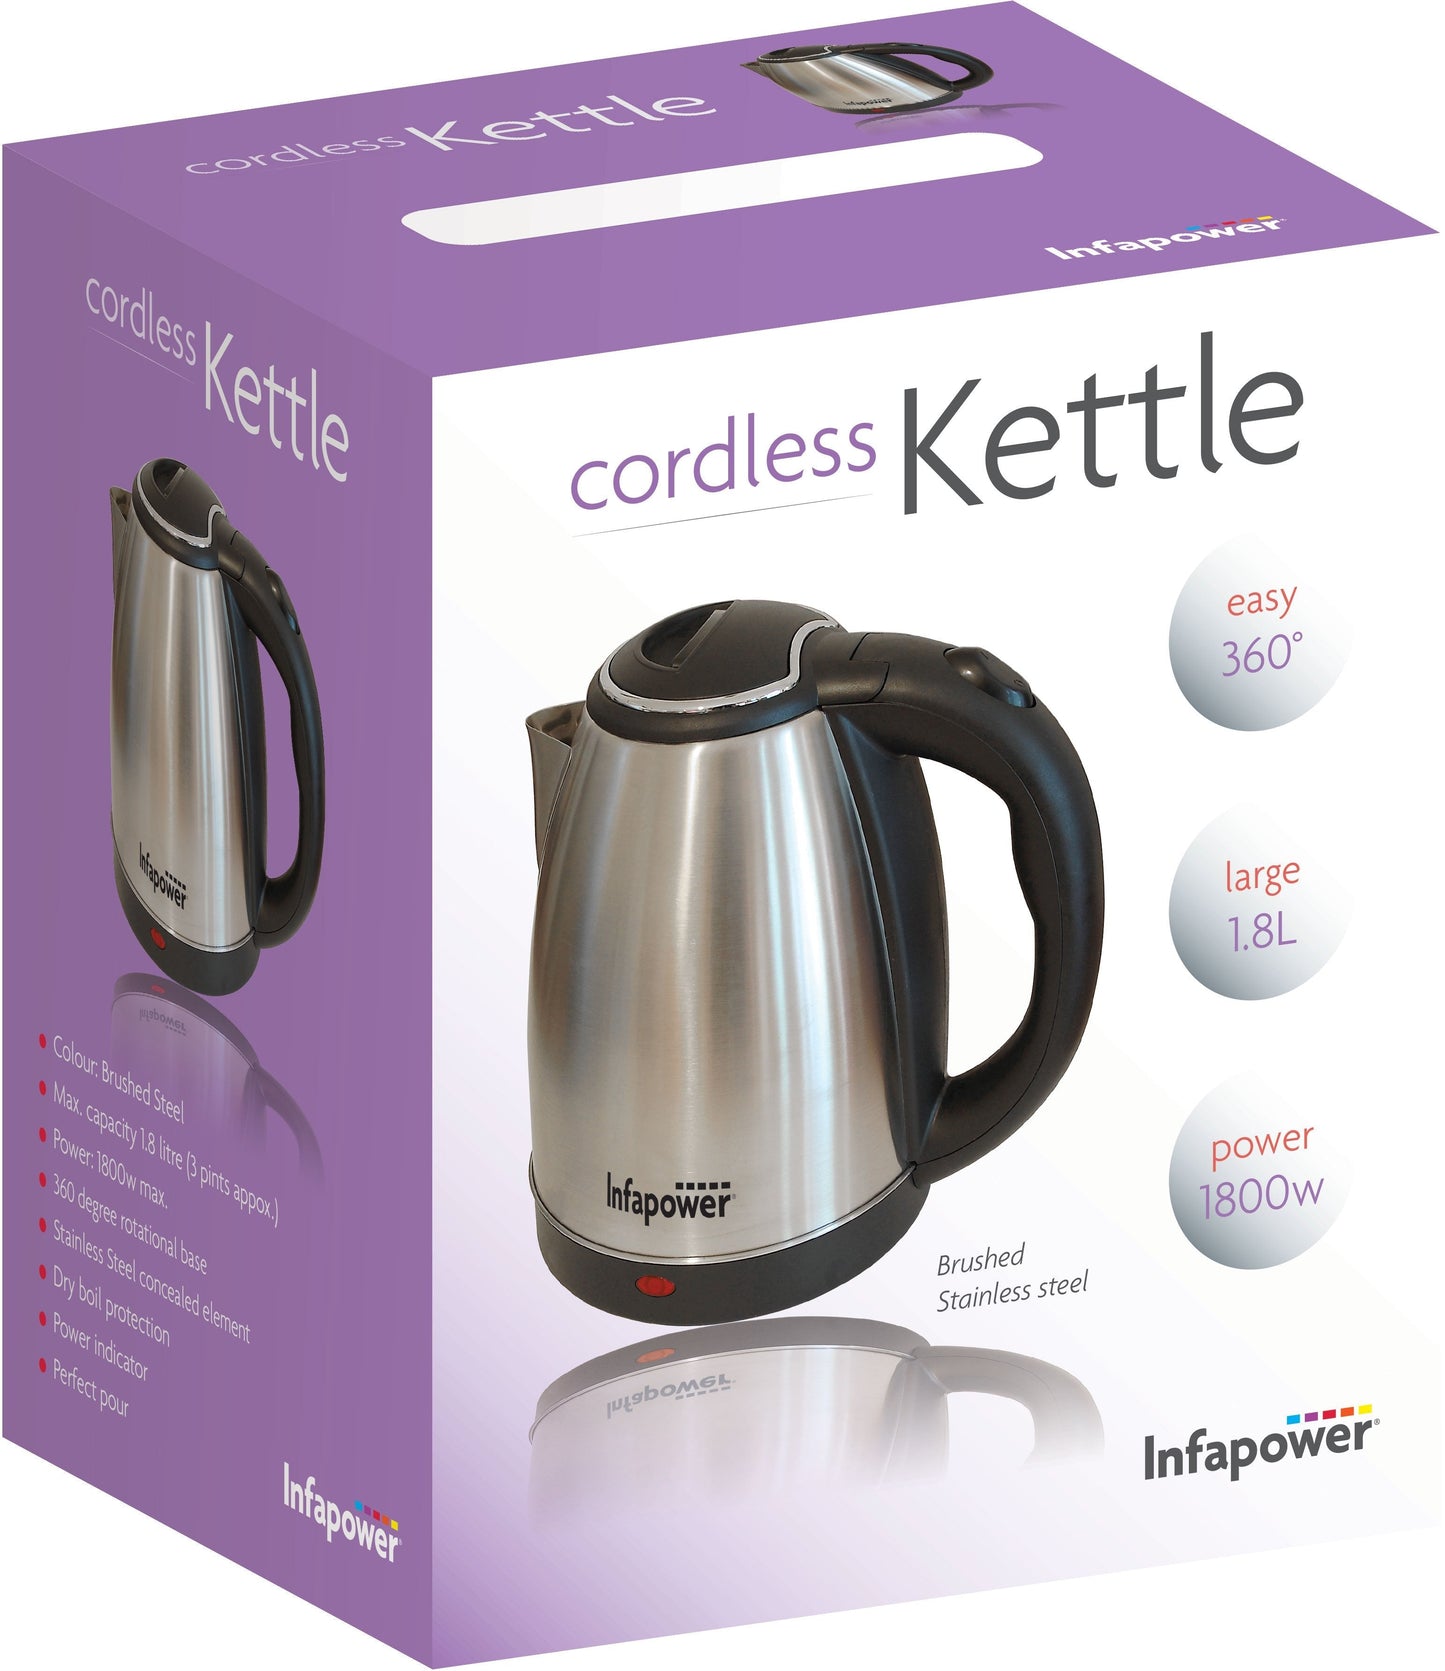 Infapower Brushed Stainless Steel Cordless Kettle 1800W 1.8L X503 (Parcel Rate)